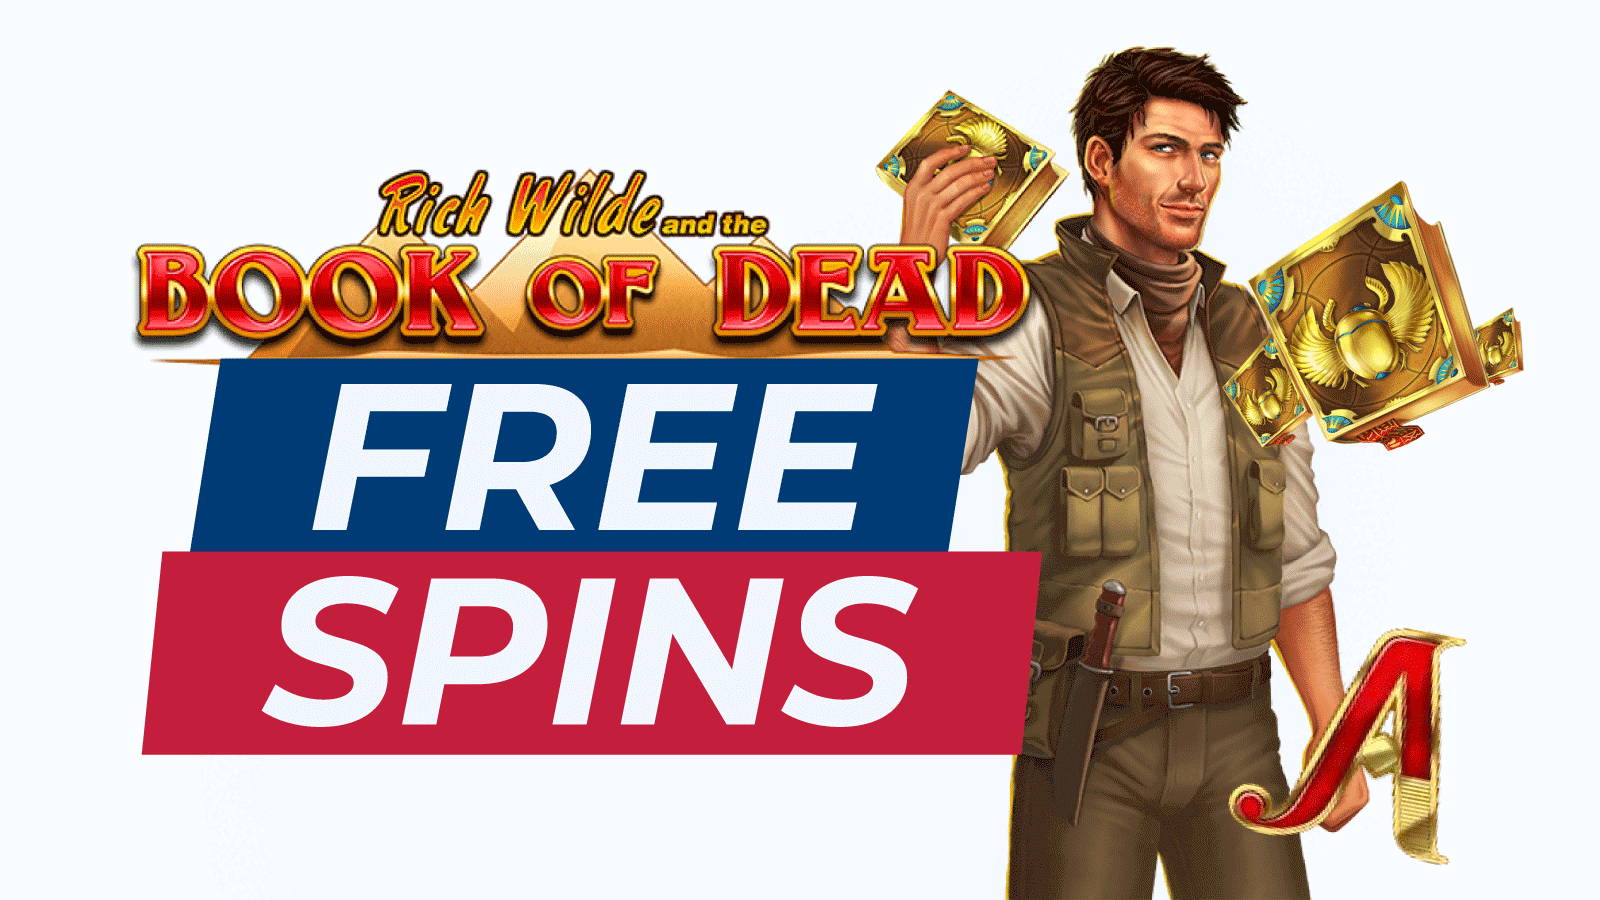 free spins on book of dead no deposit